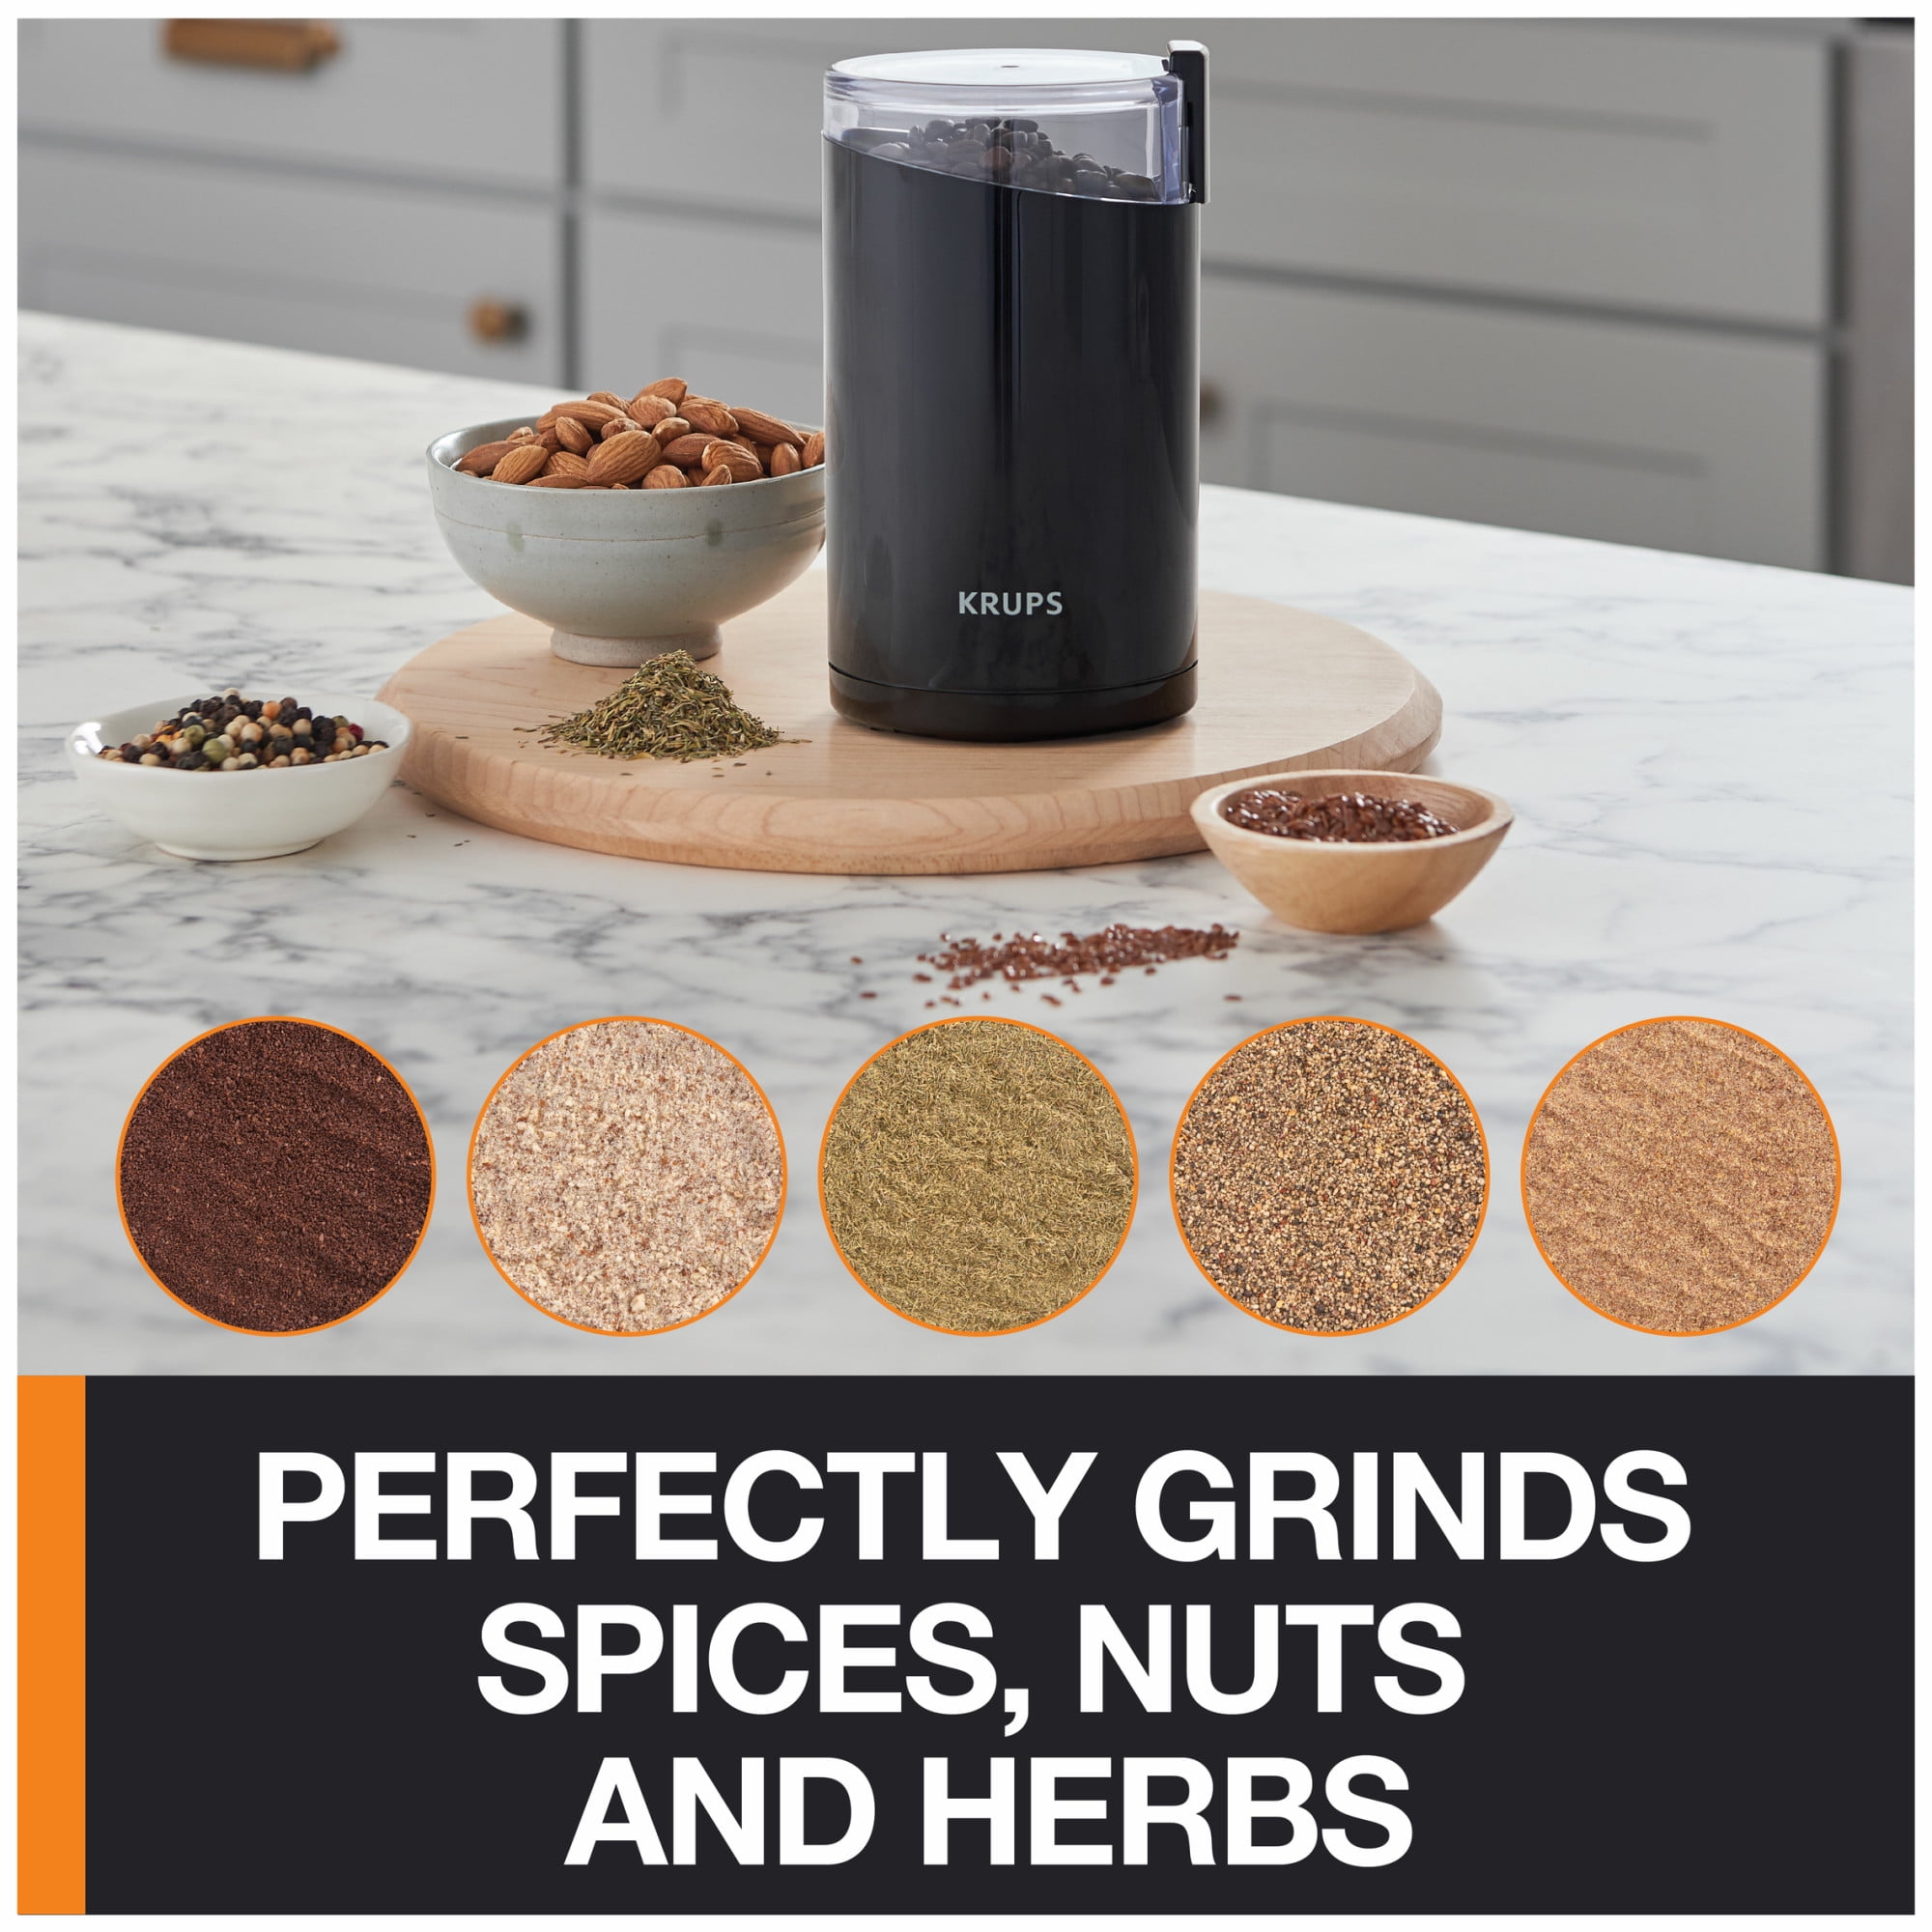 Krups Fast Touch Coffee Grinder 